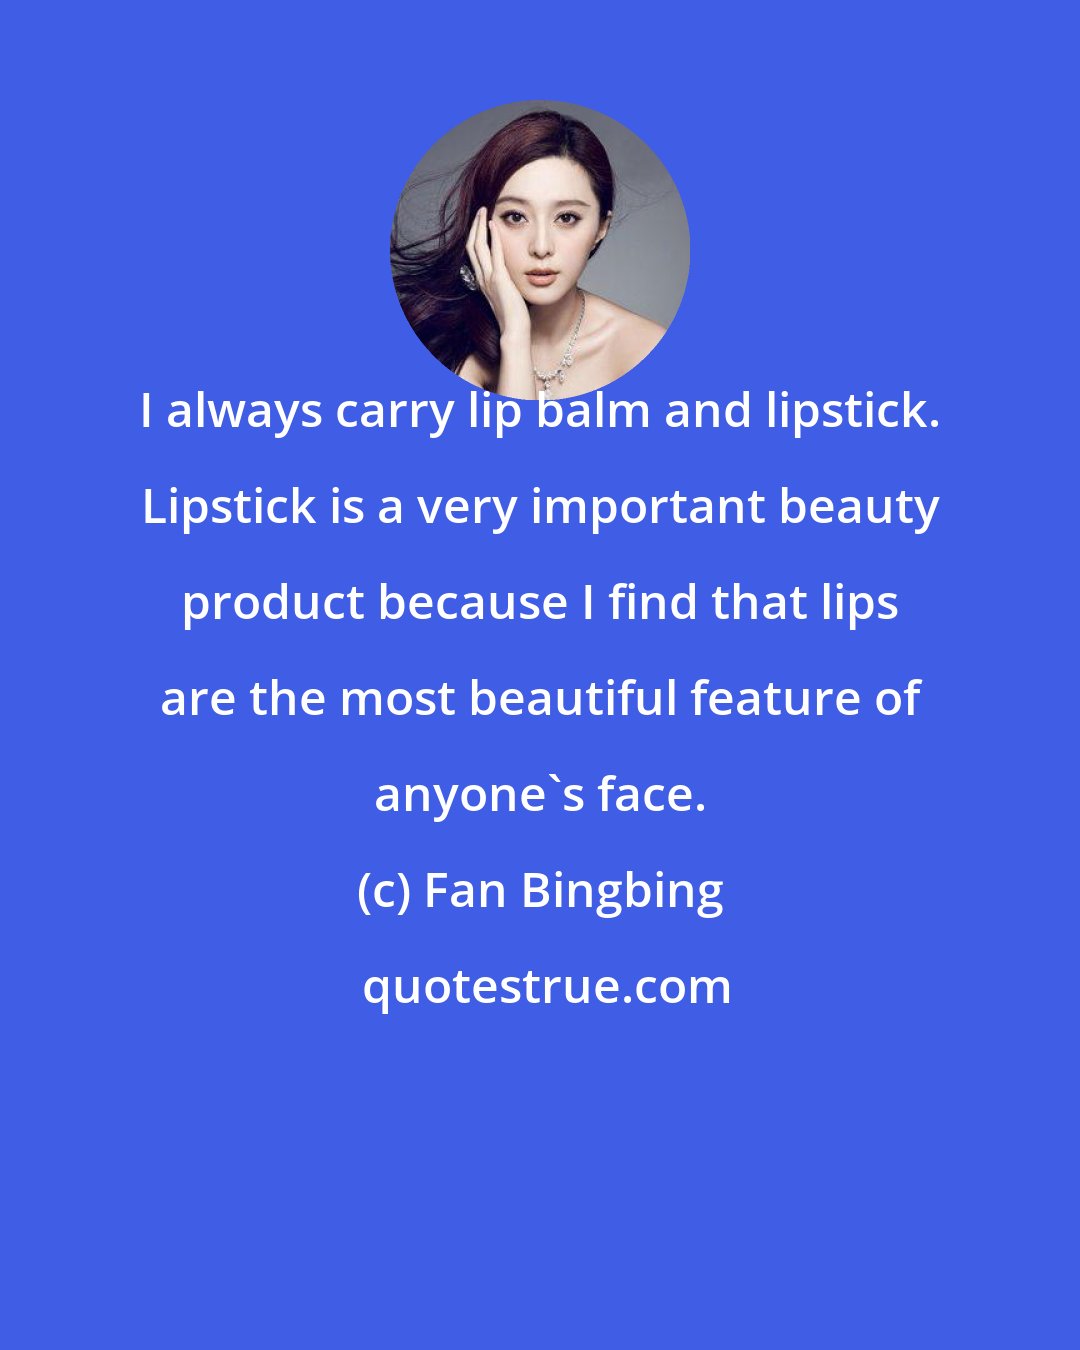 Fan Bingbing: I always carry lip balm and lipstick. Lipstick is a very important beauty product because I find that lips are the most beautiful feature of anyone's face.